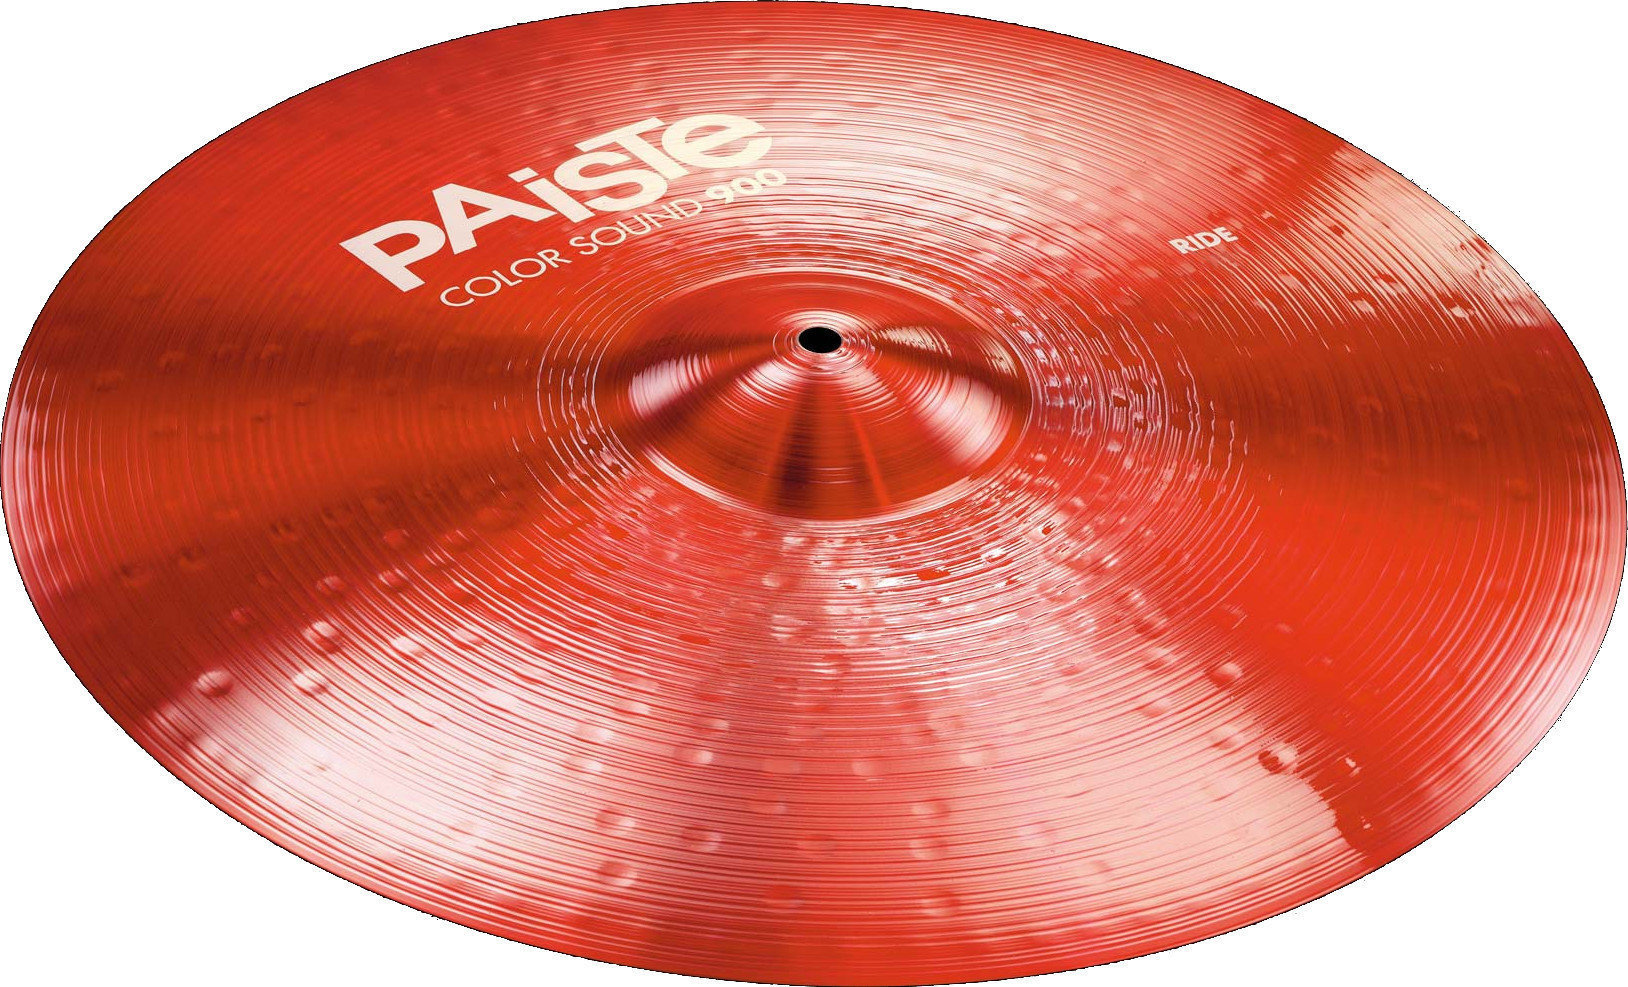 Ride Cymbal Paiste Color Sound 900 Ride Cymbal 22" Rød